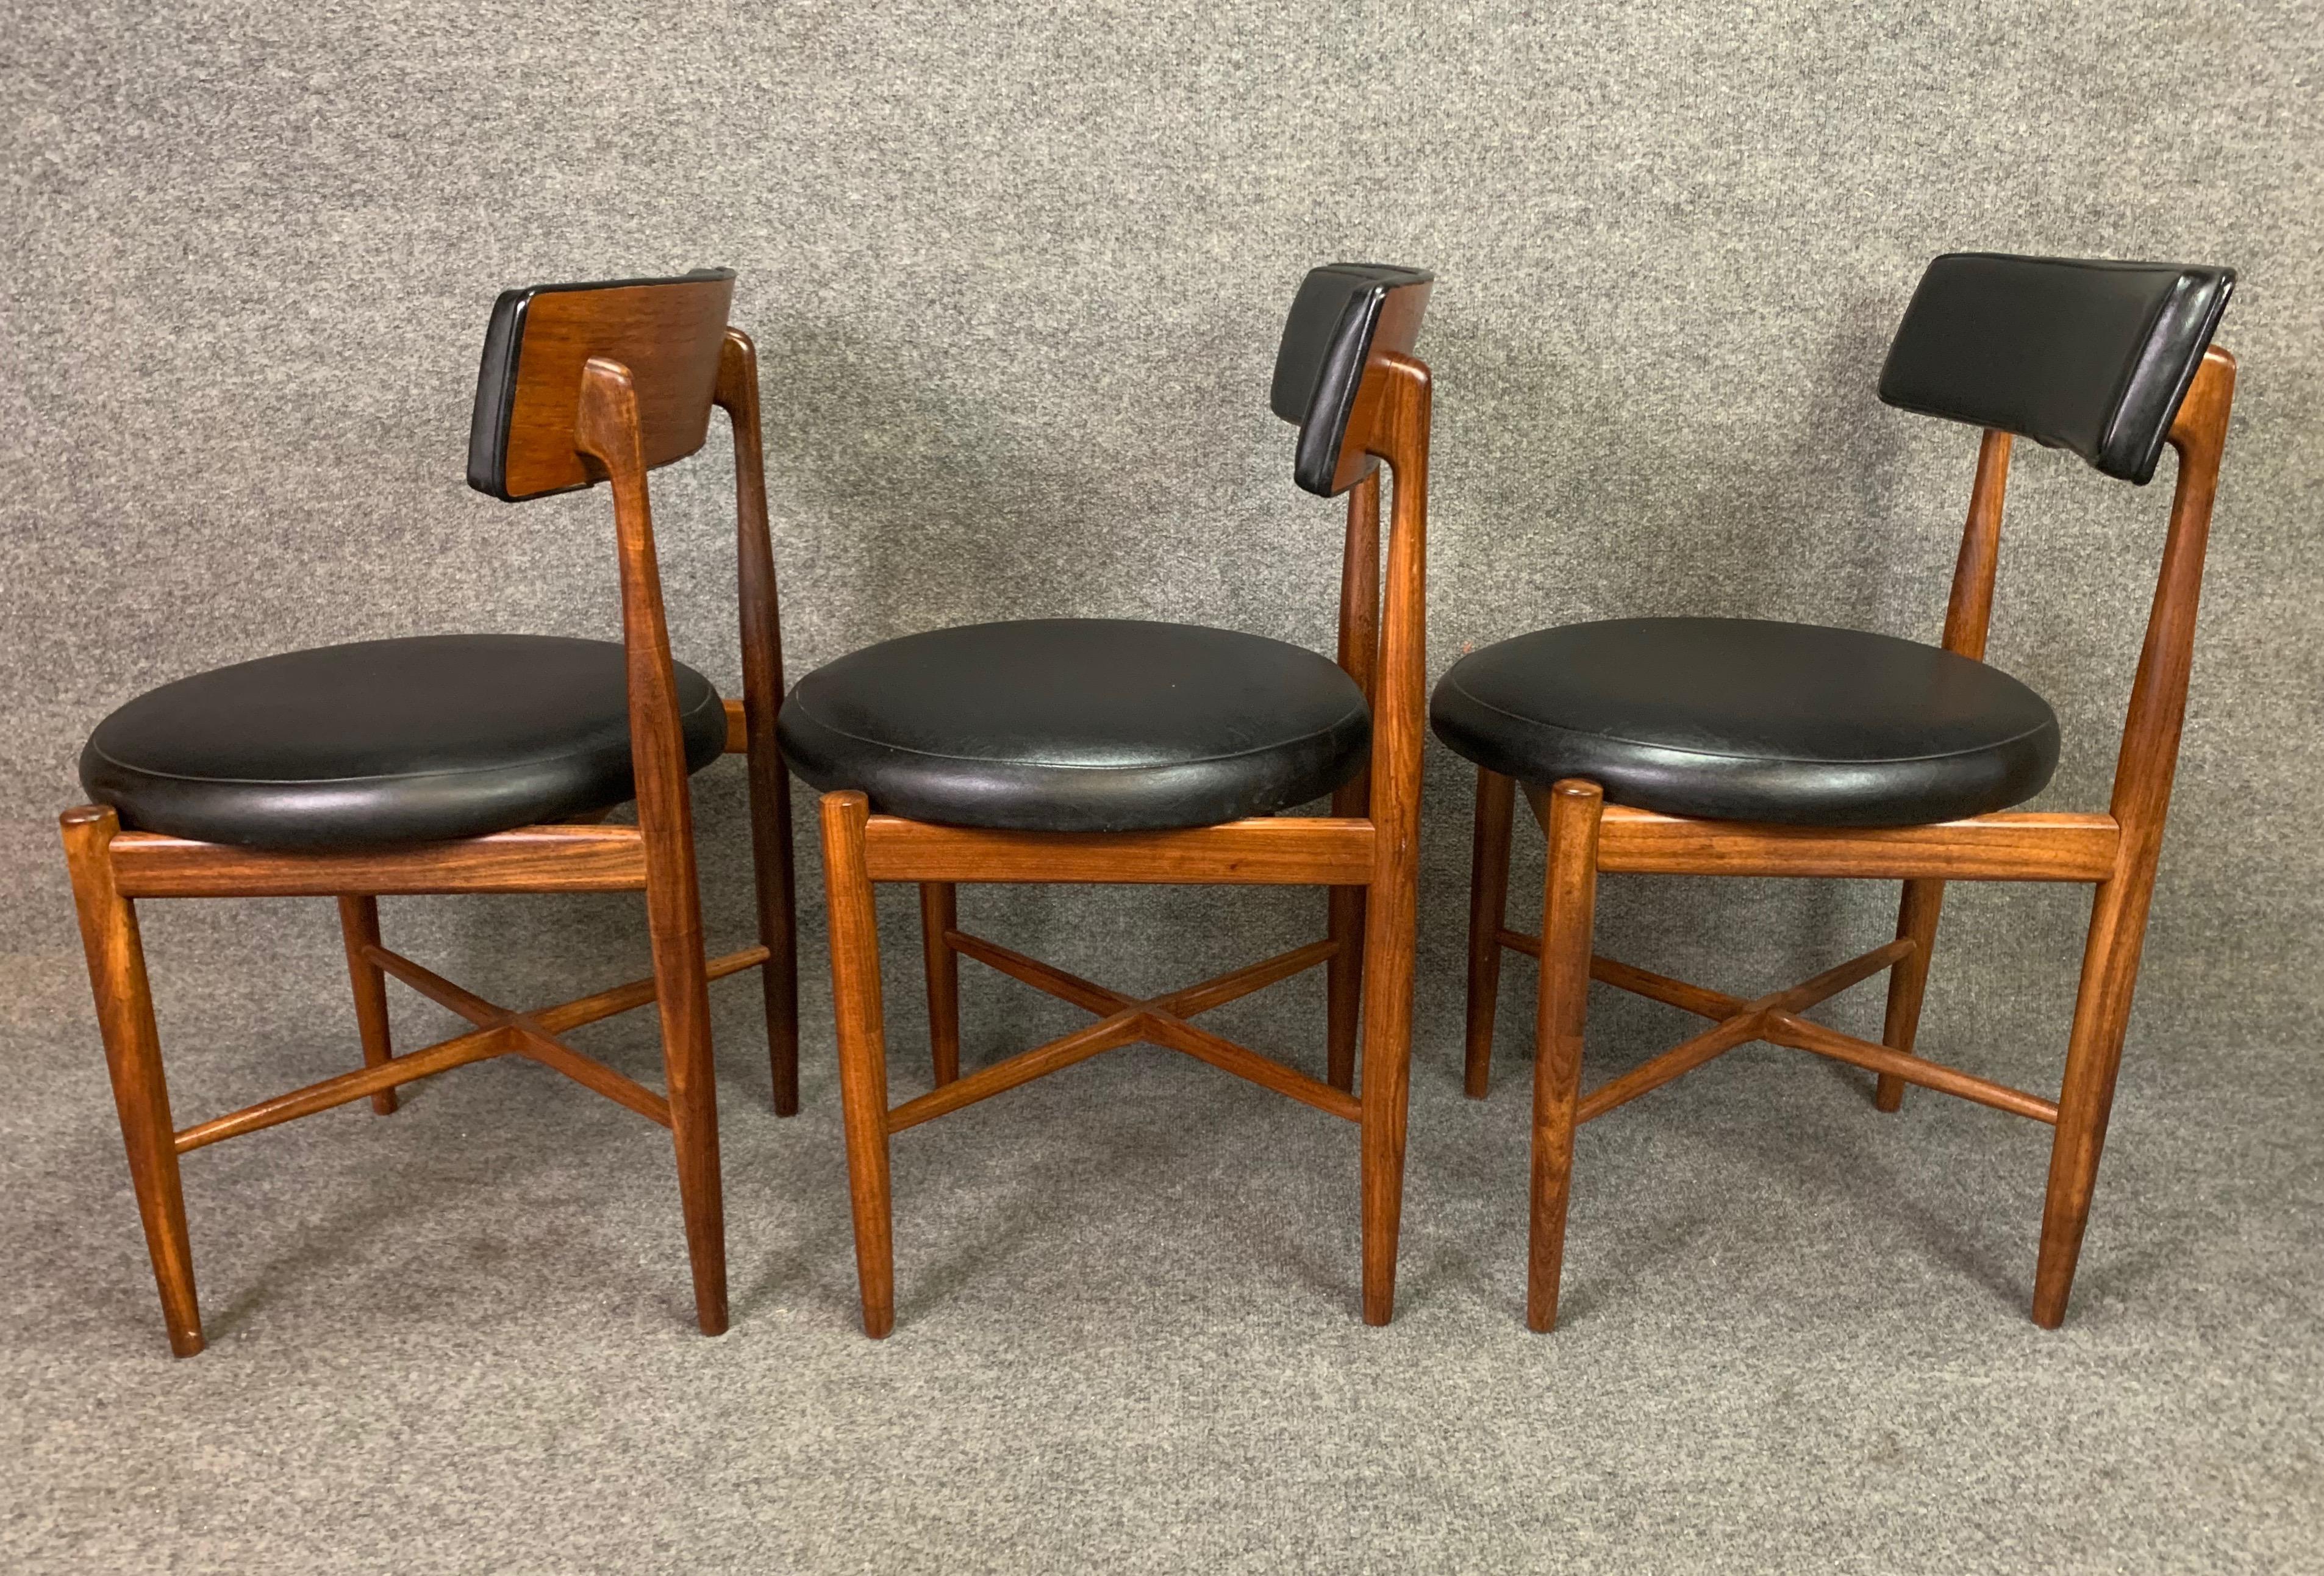 Woodwork Six Vintage British Mid Century Teak Dining Chairs by Victor Wilkins for G Plan